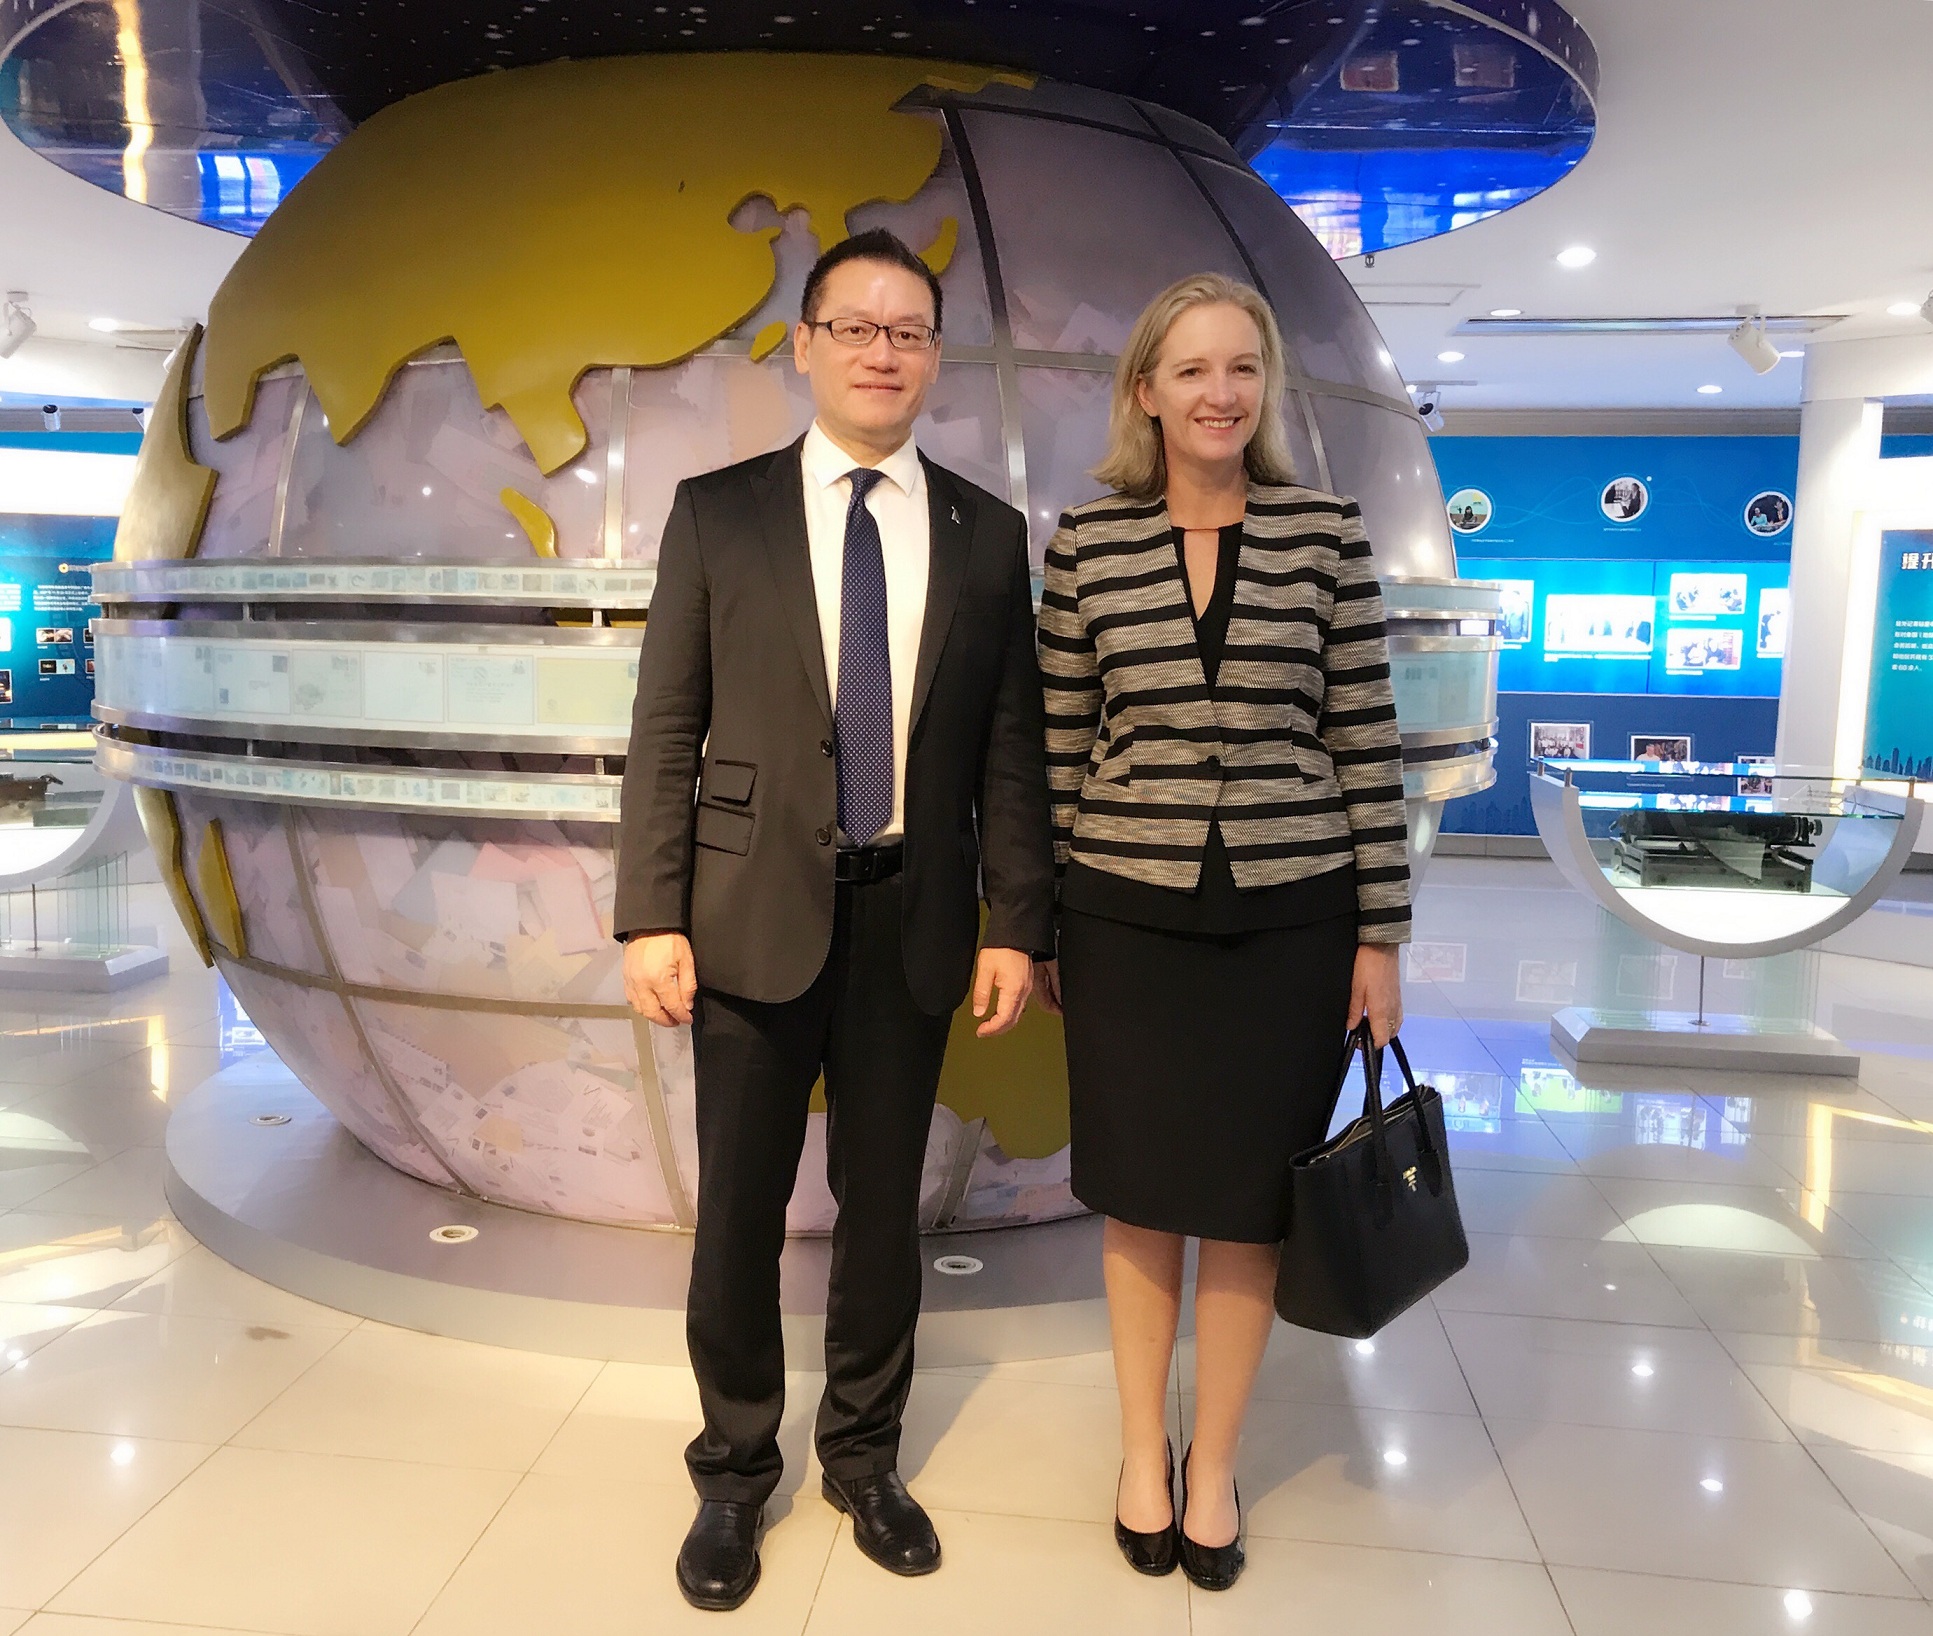 Raymond Huo and Johanna Coughlan, Co-Chairs of New Zealand OBOR Think Tank and China New Zealand OBOR Foundation.